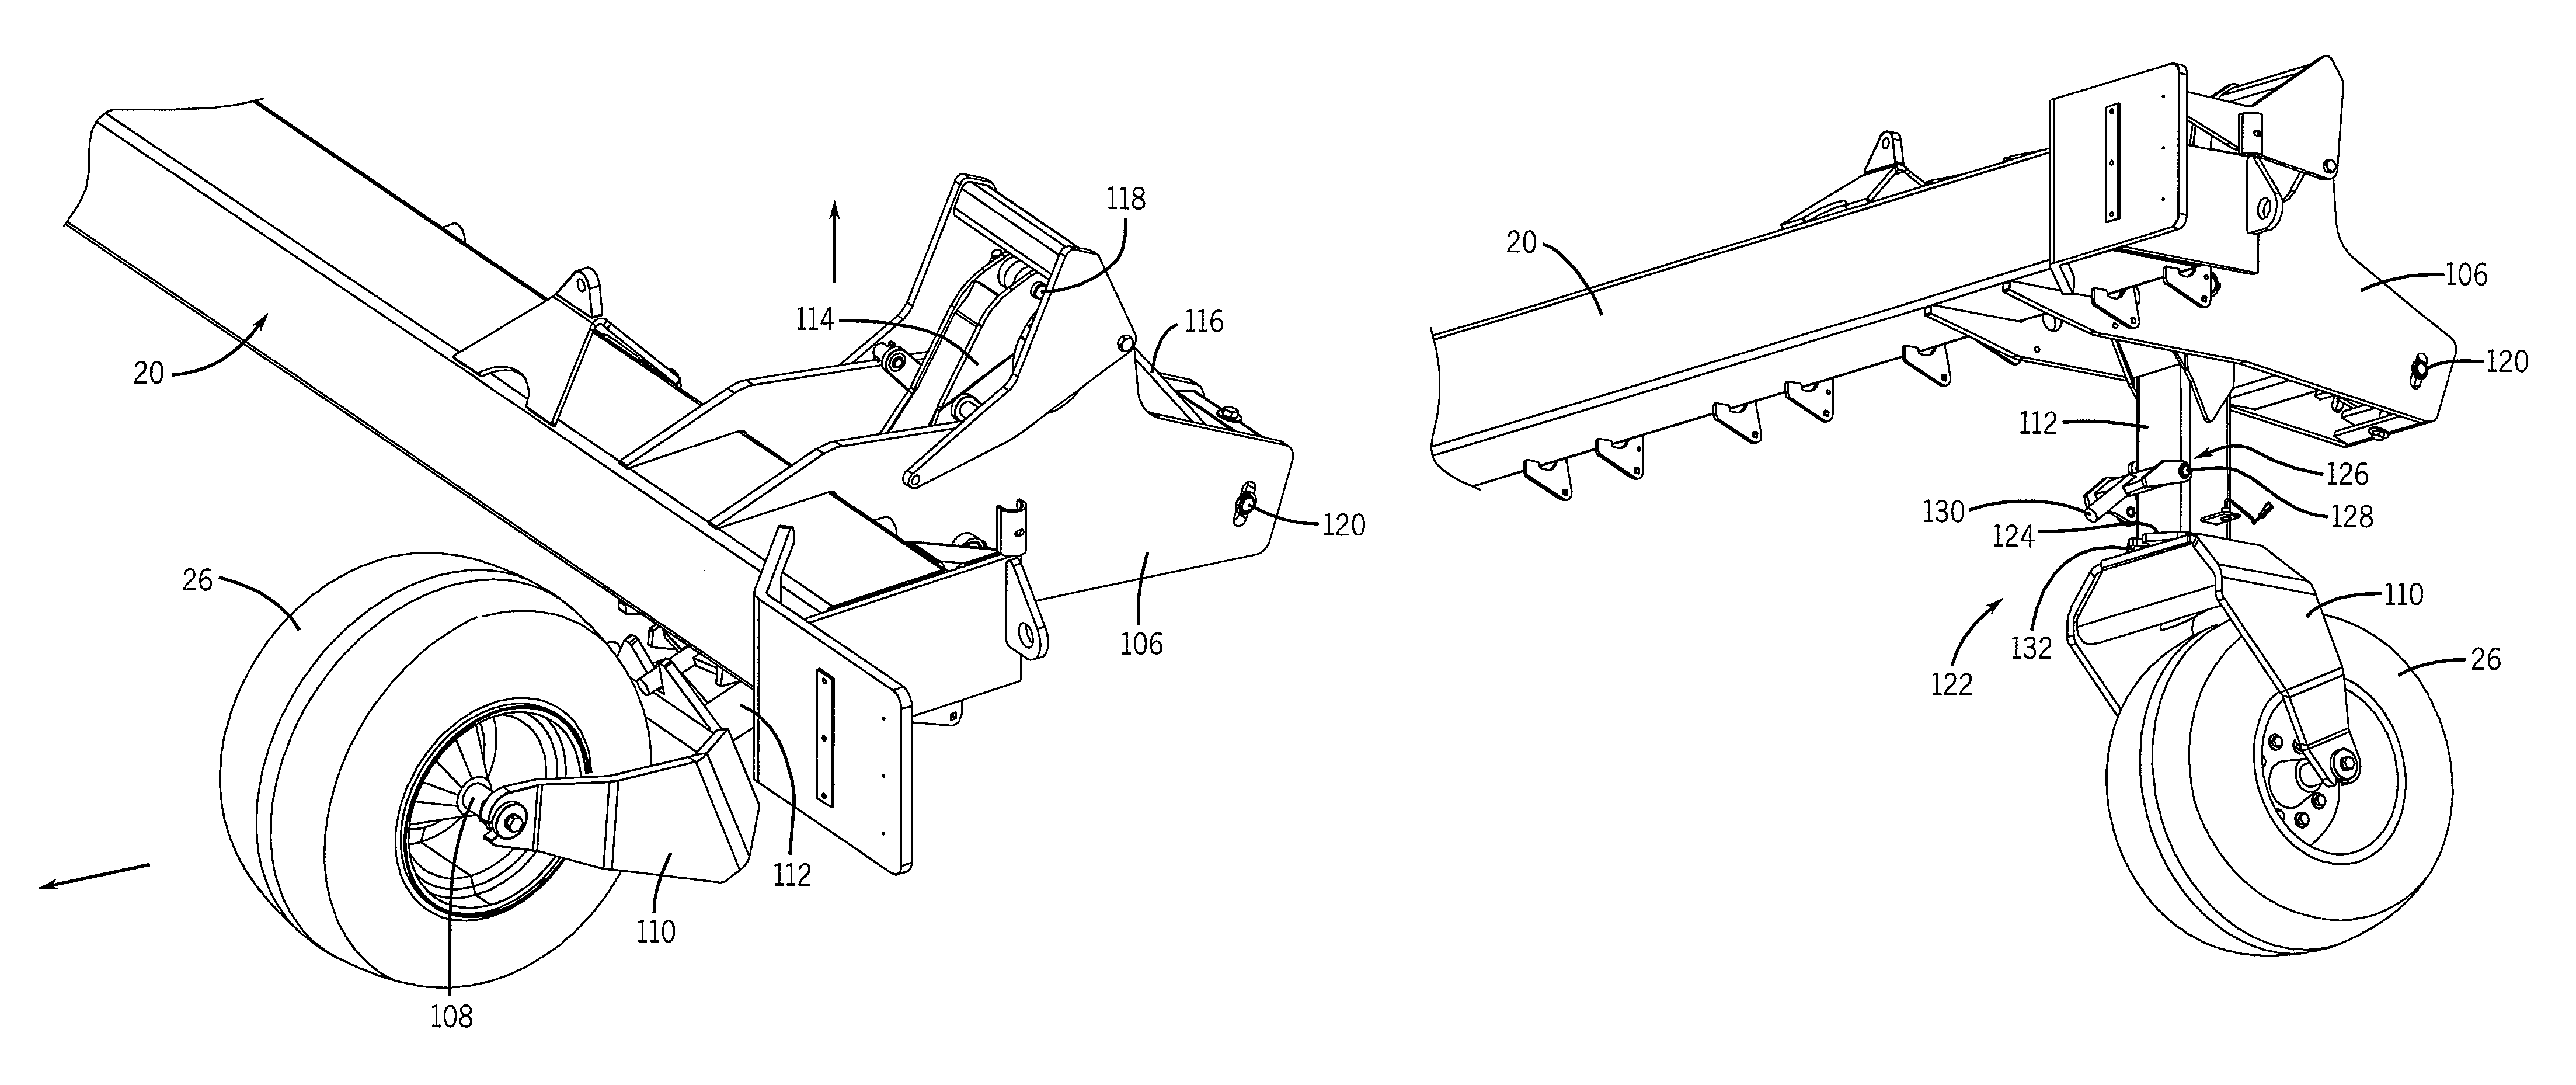 Agricultural implement having wheels that caster